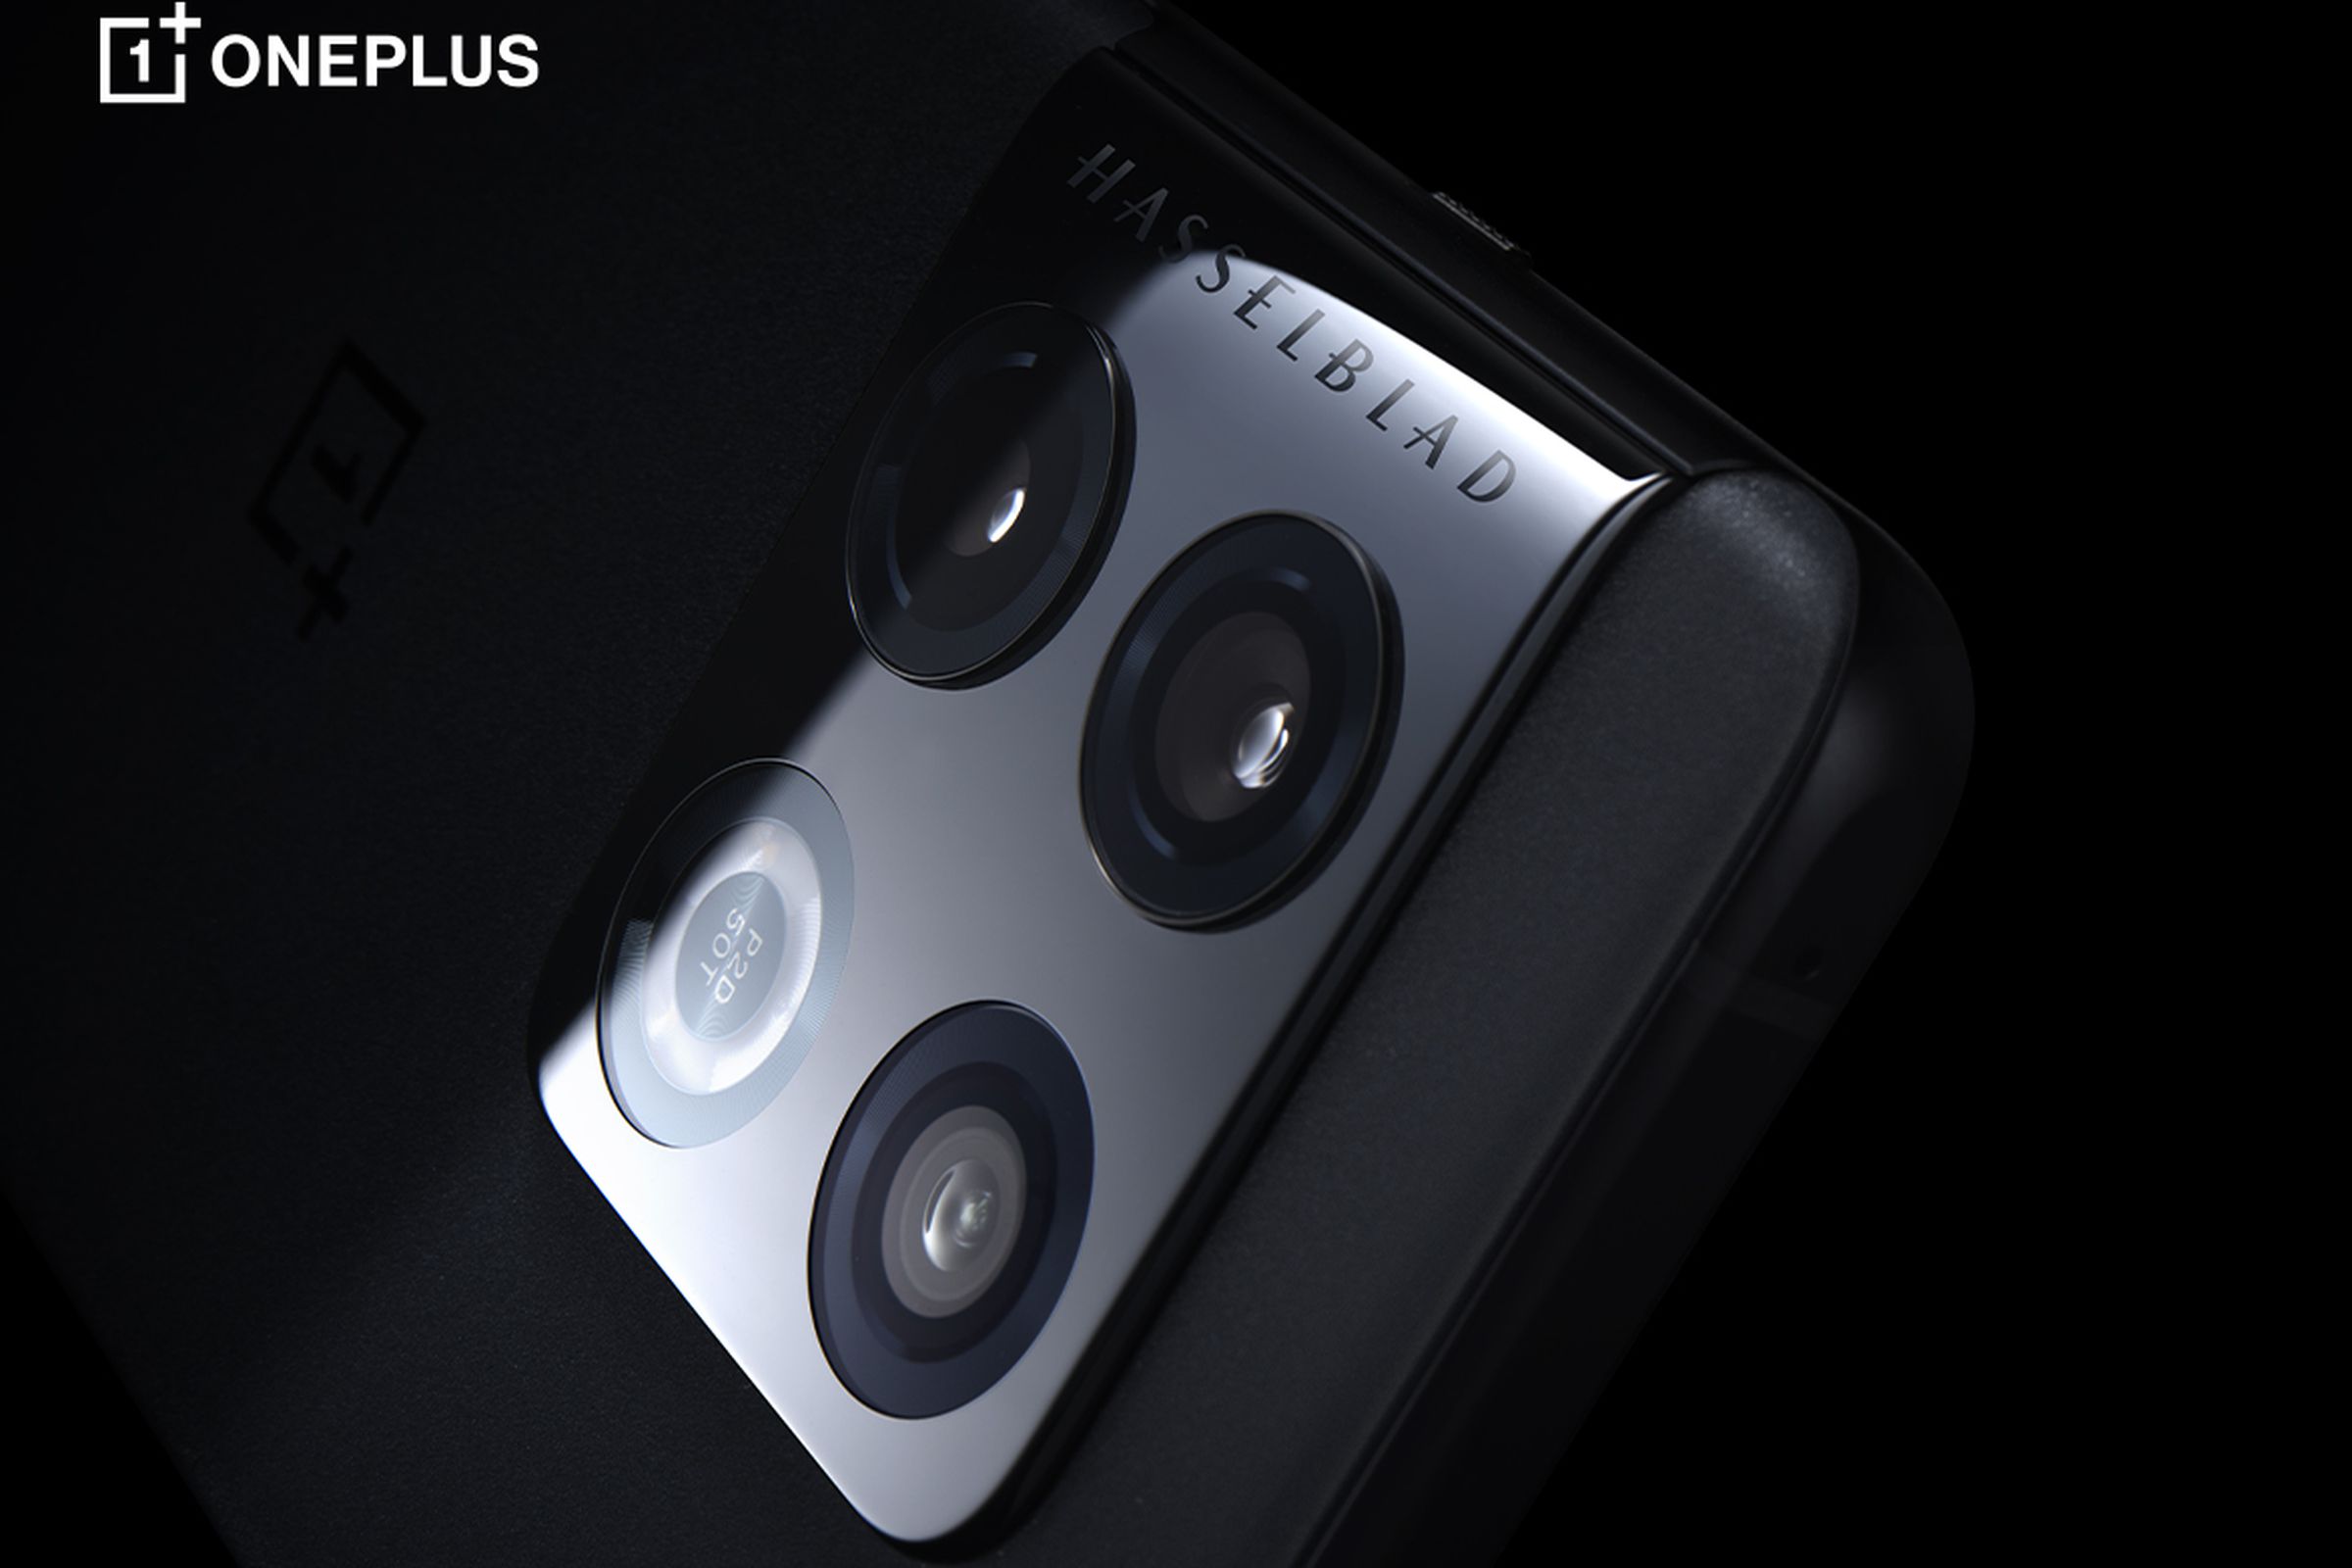 OnePlus continues to lean into partner Hasselblad’s image tuning expertise and branding.